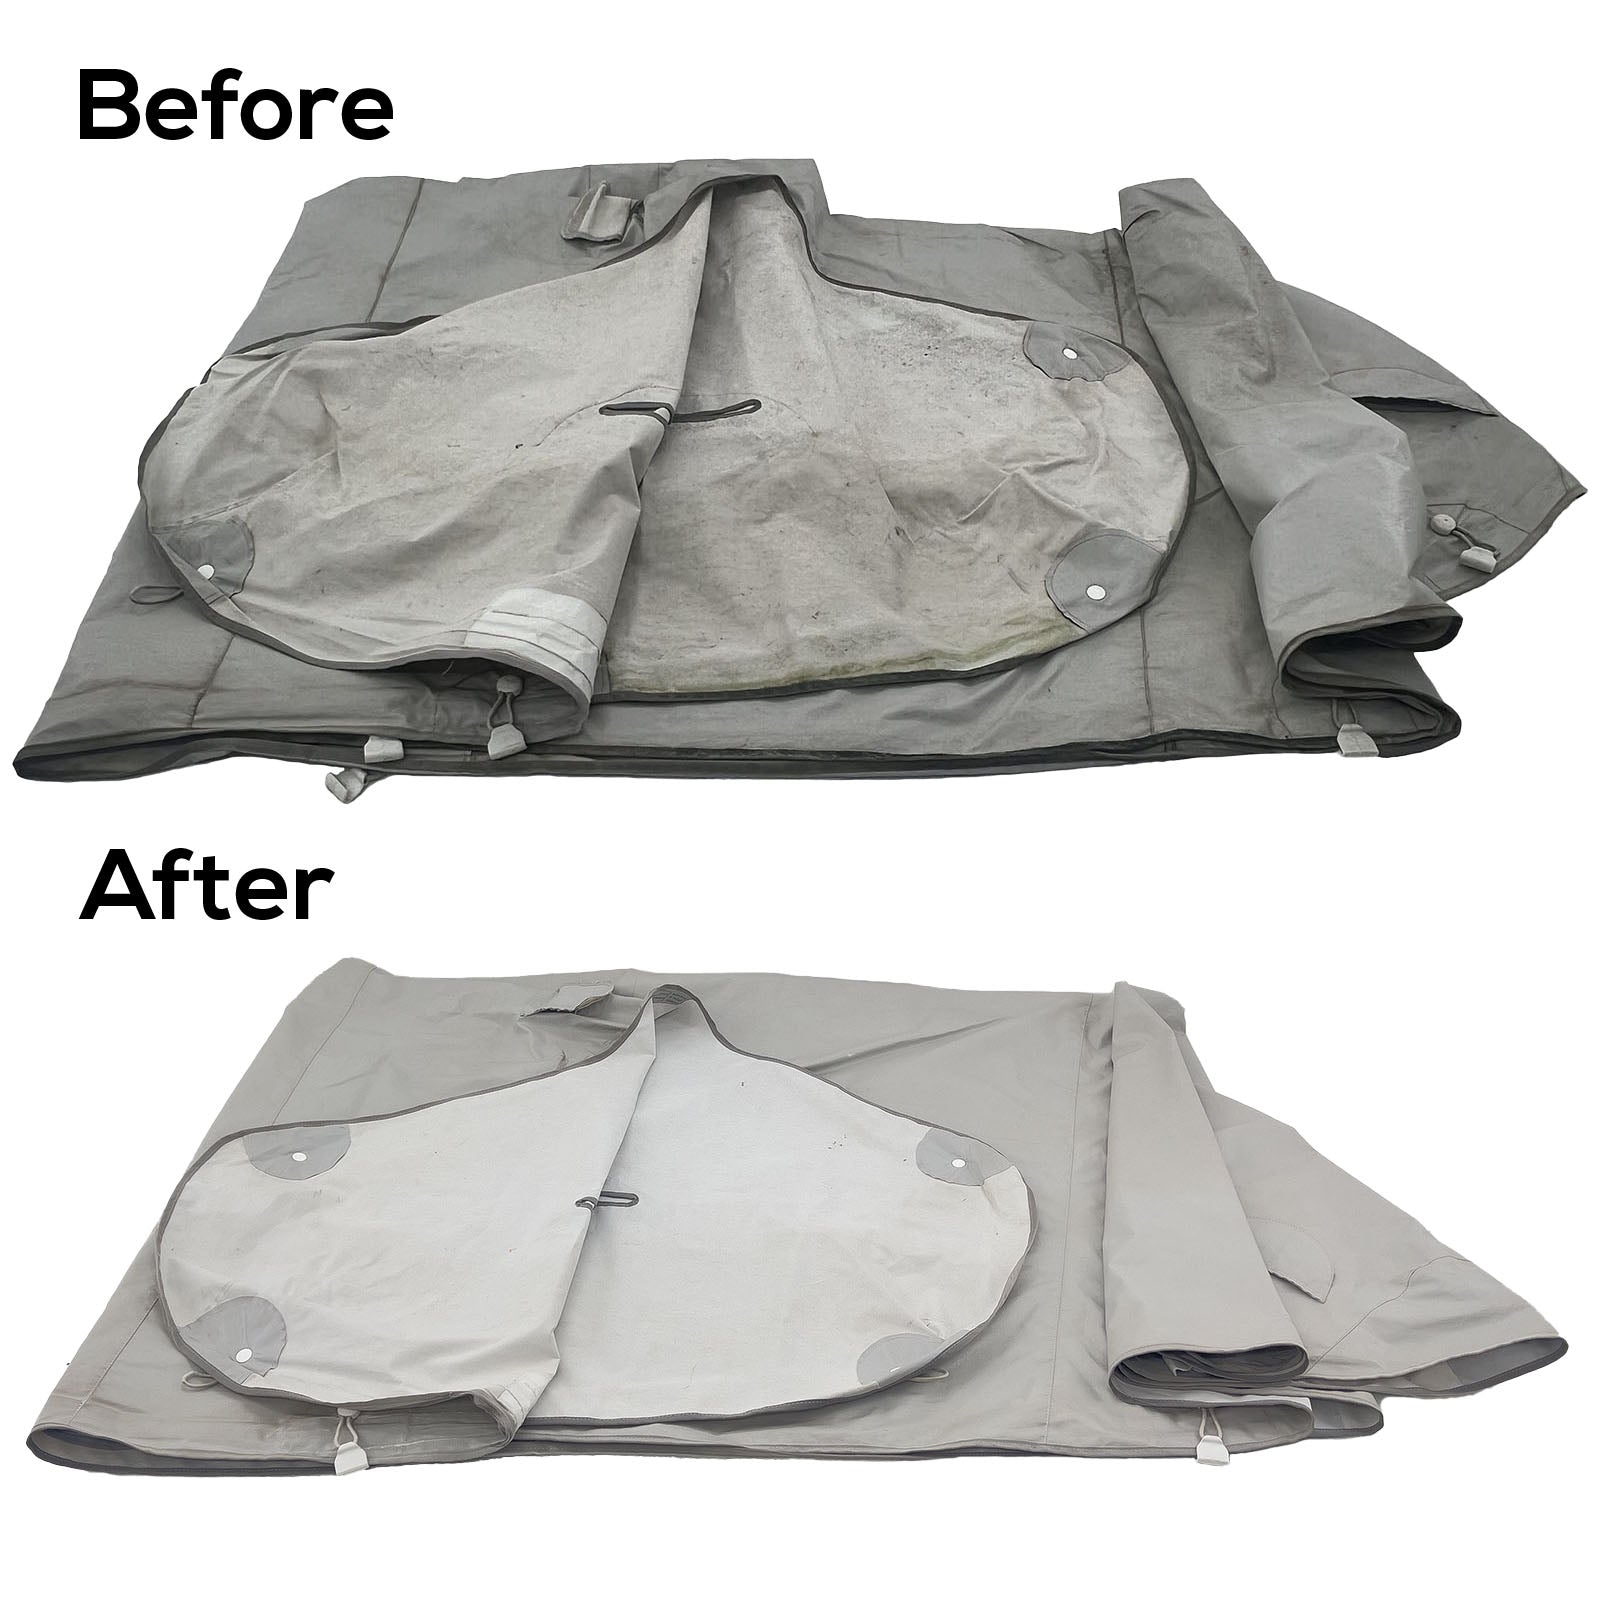 FAQ Friday #37 - How well did that first cover you sent for washing and re-waterproofing come up?